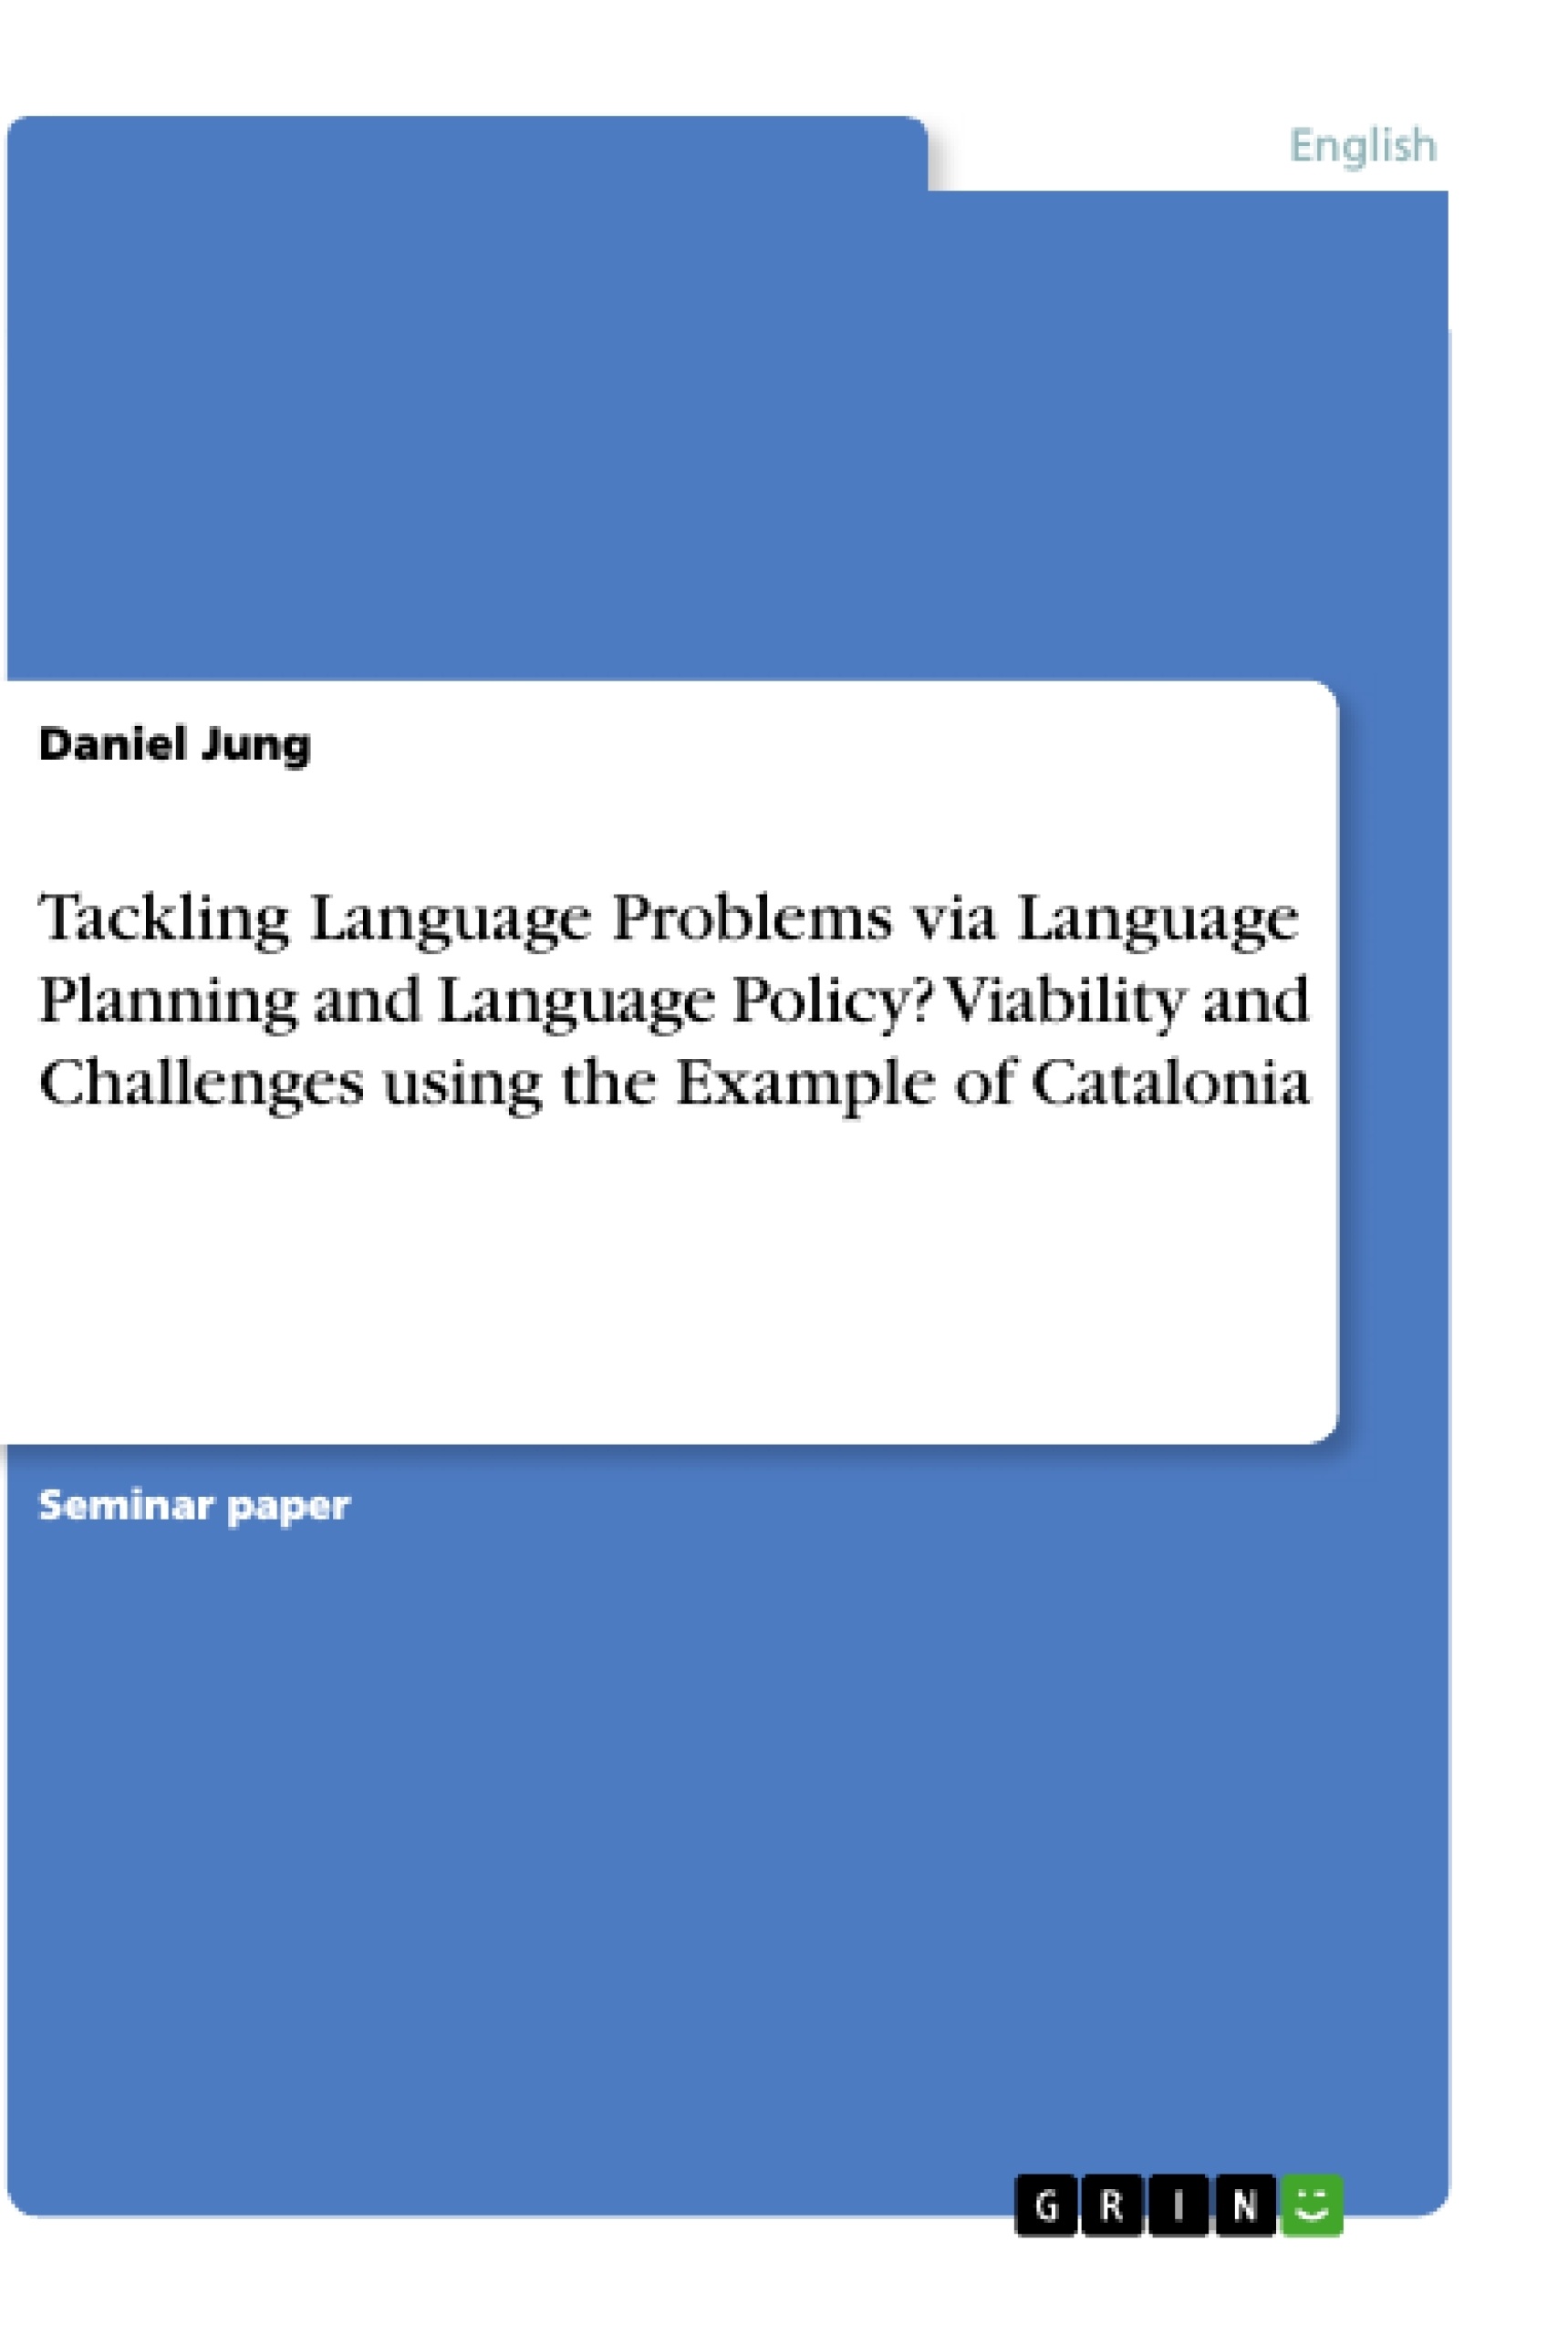 Title: Tackling Language Problems via Language Planning and Language Policy? Viability and Challenges using the Example of Catalonia